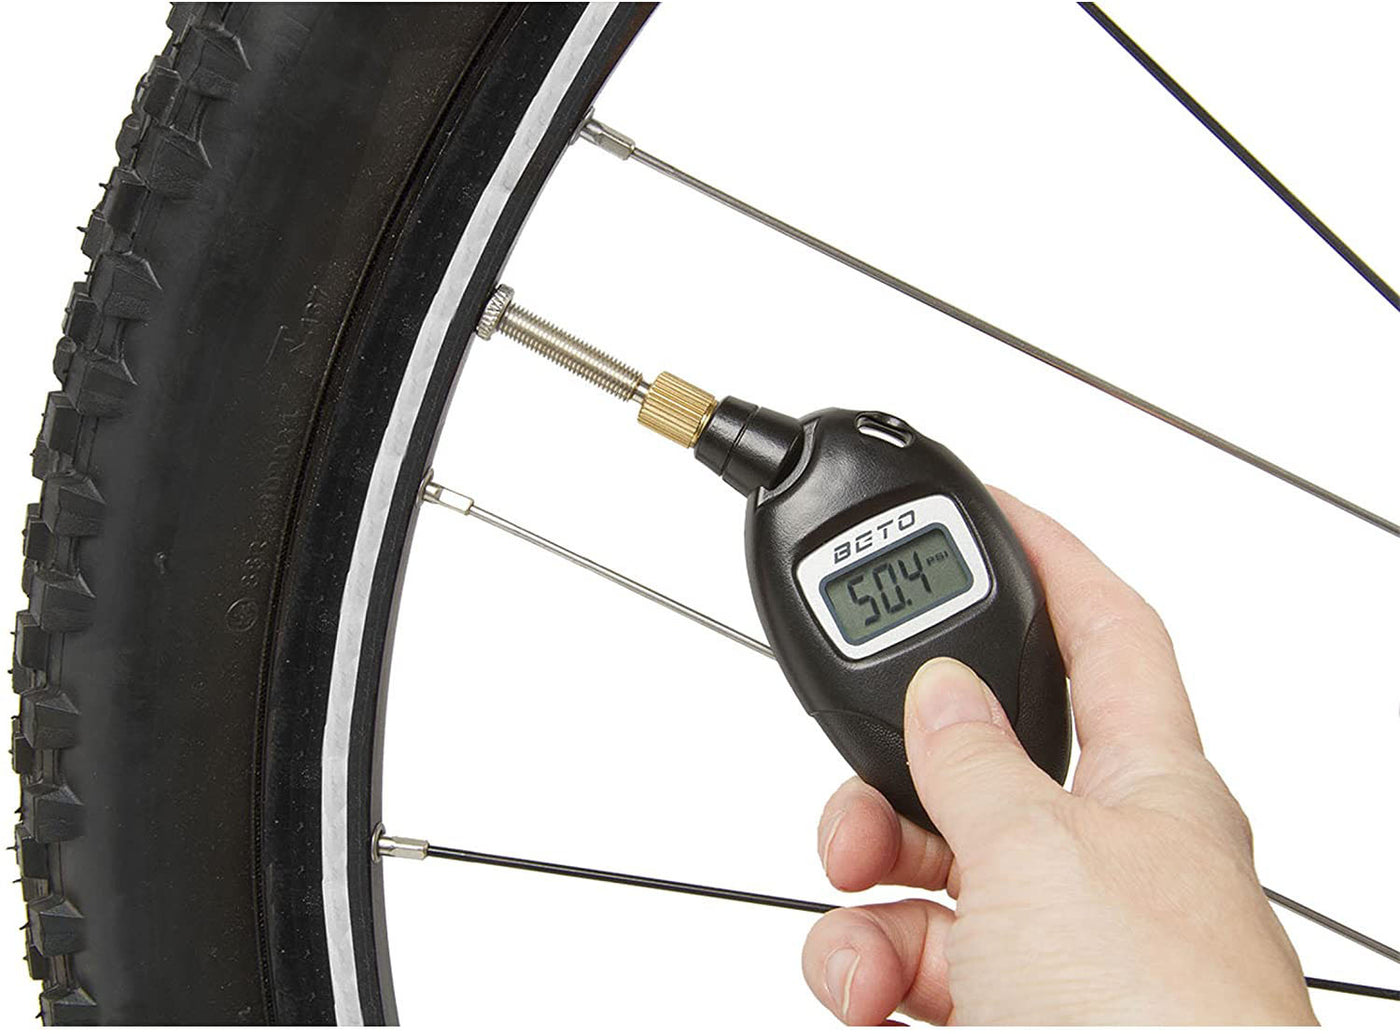 Beto Digital Air Pressure Monitor for Bicycle - Cyclop.in